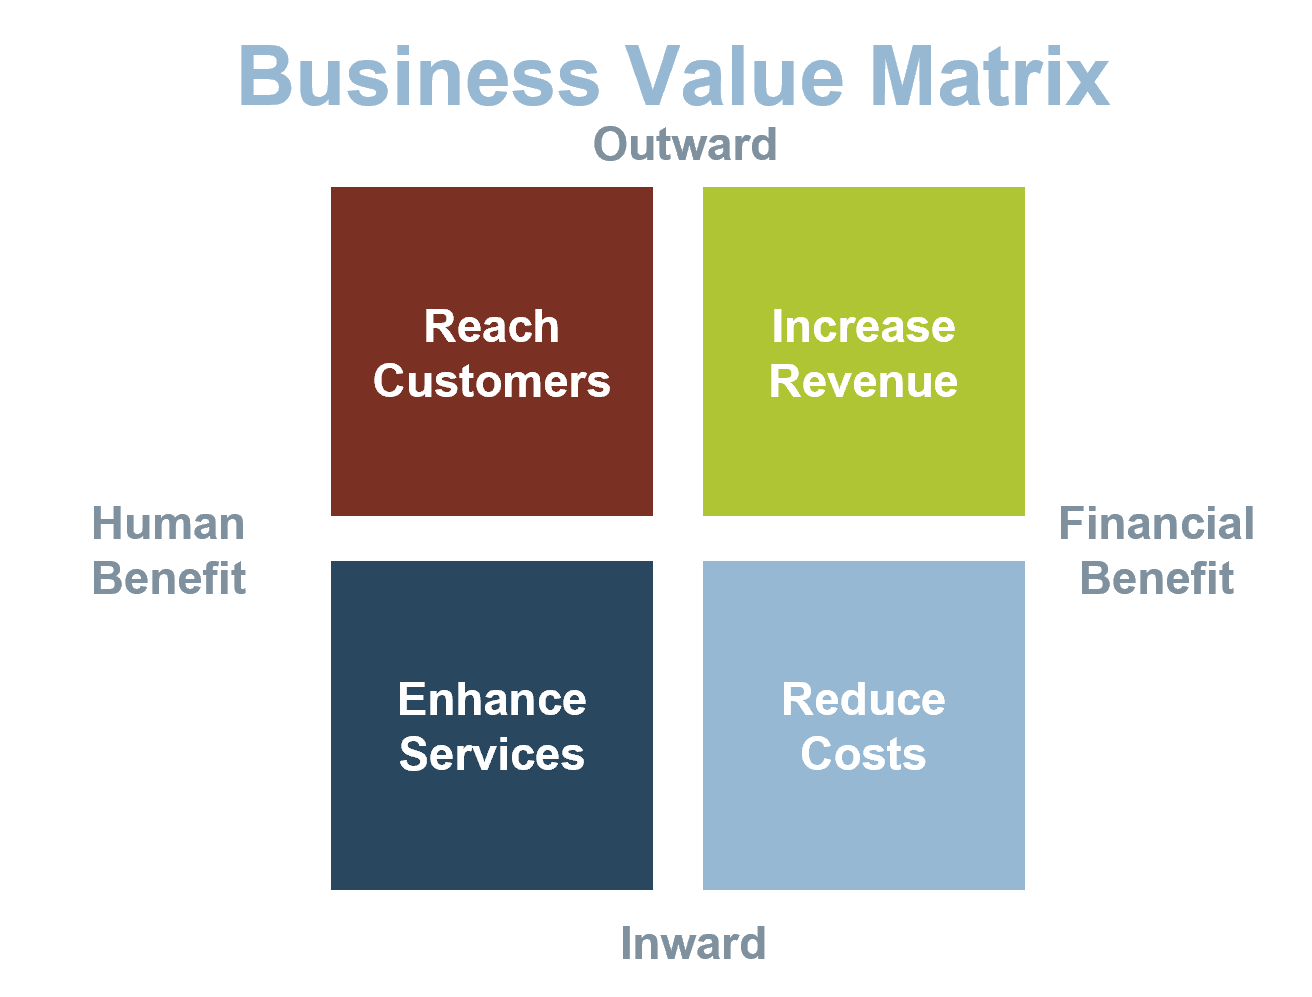 A business value matrix is shown. It shows the relationship between reading customers, increase revenue, reduce costs, and enhance services.